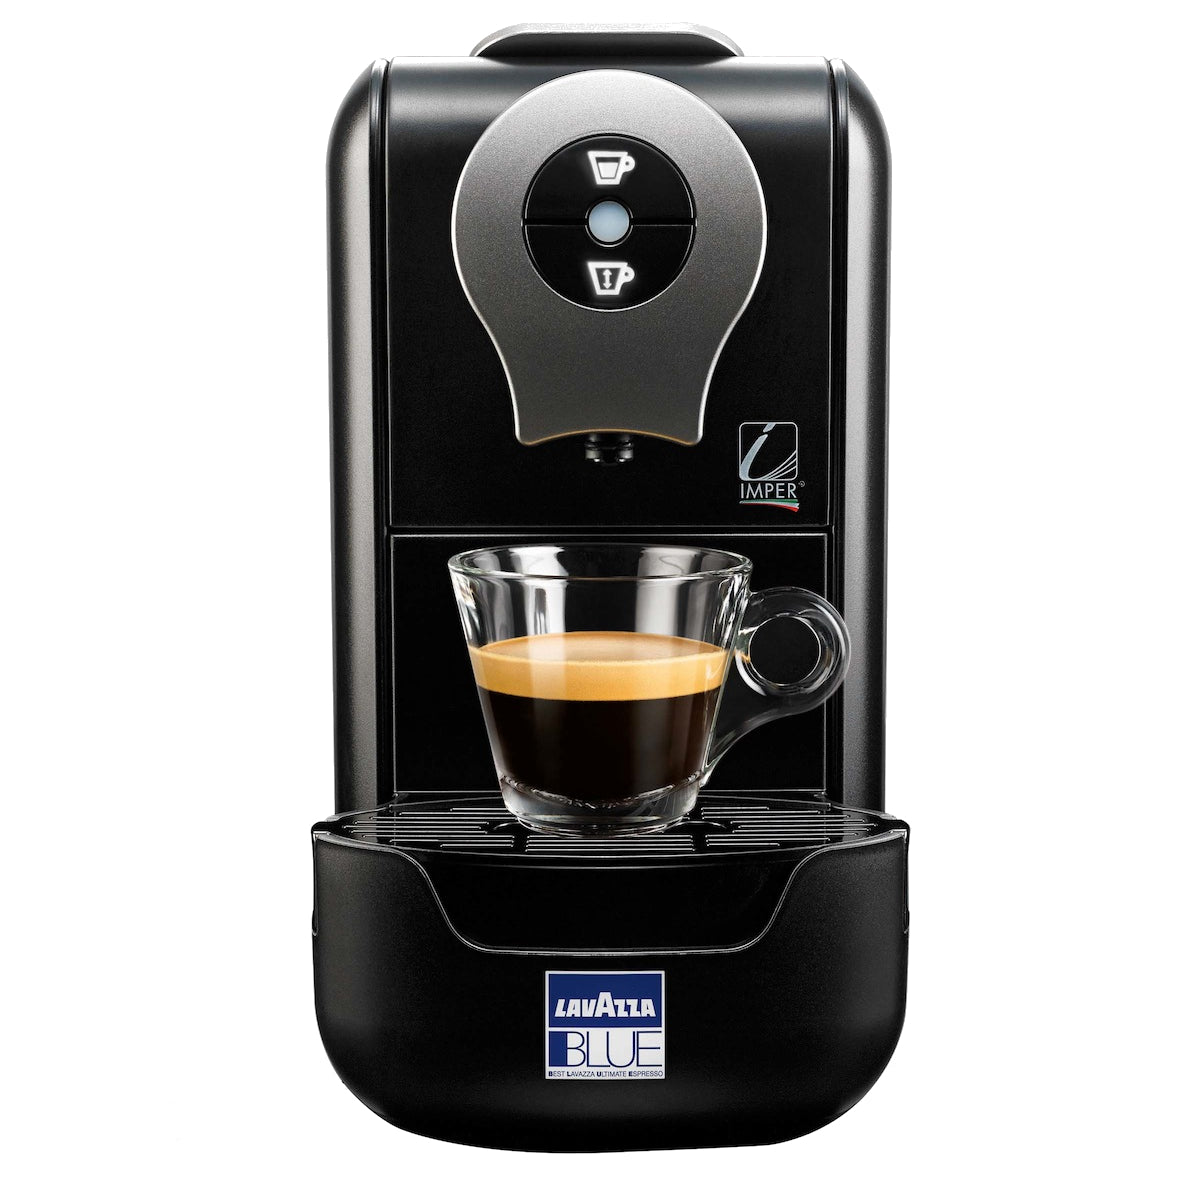 Lavazza Blue LB900 coffee machine and milk frother on Vimeo